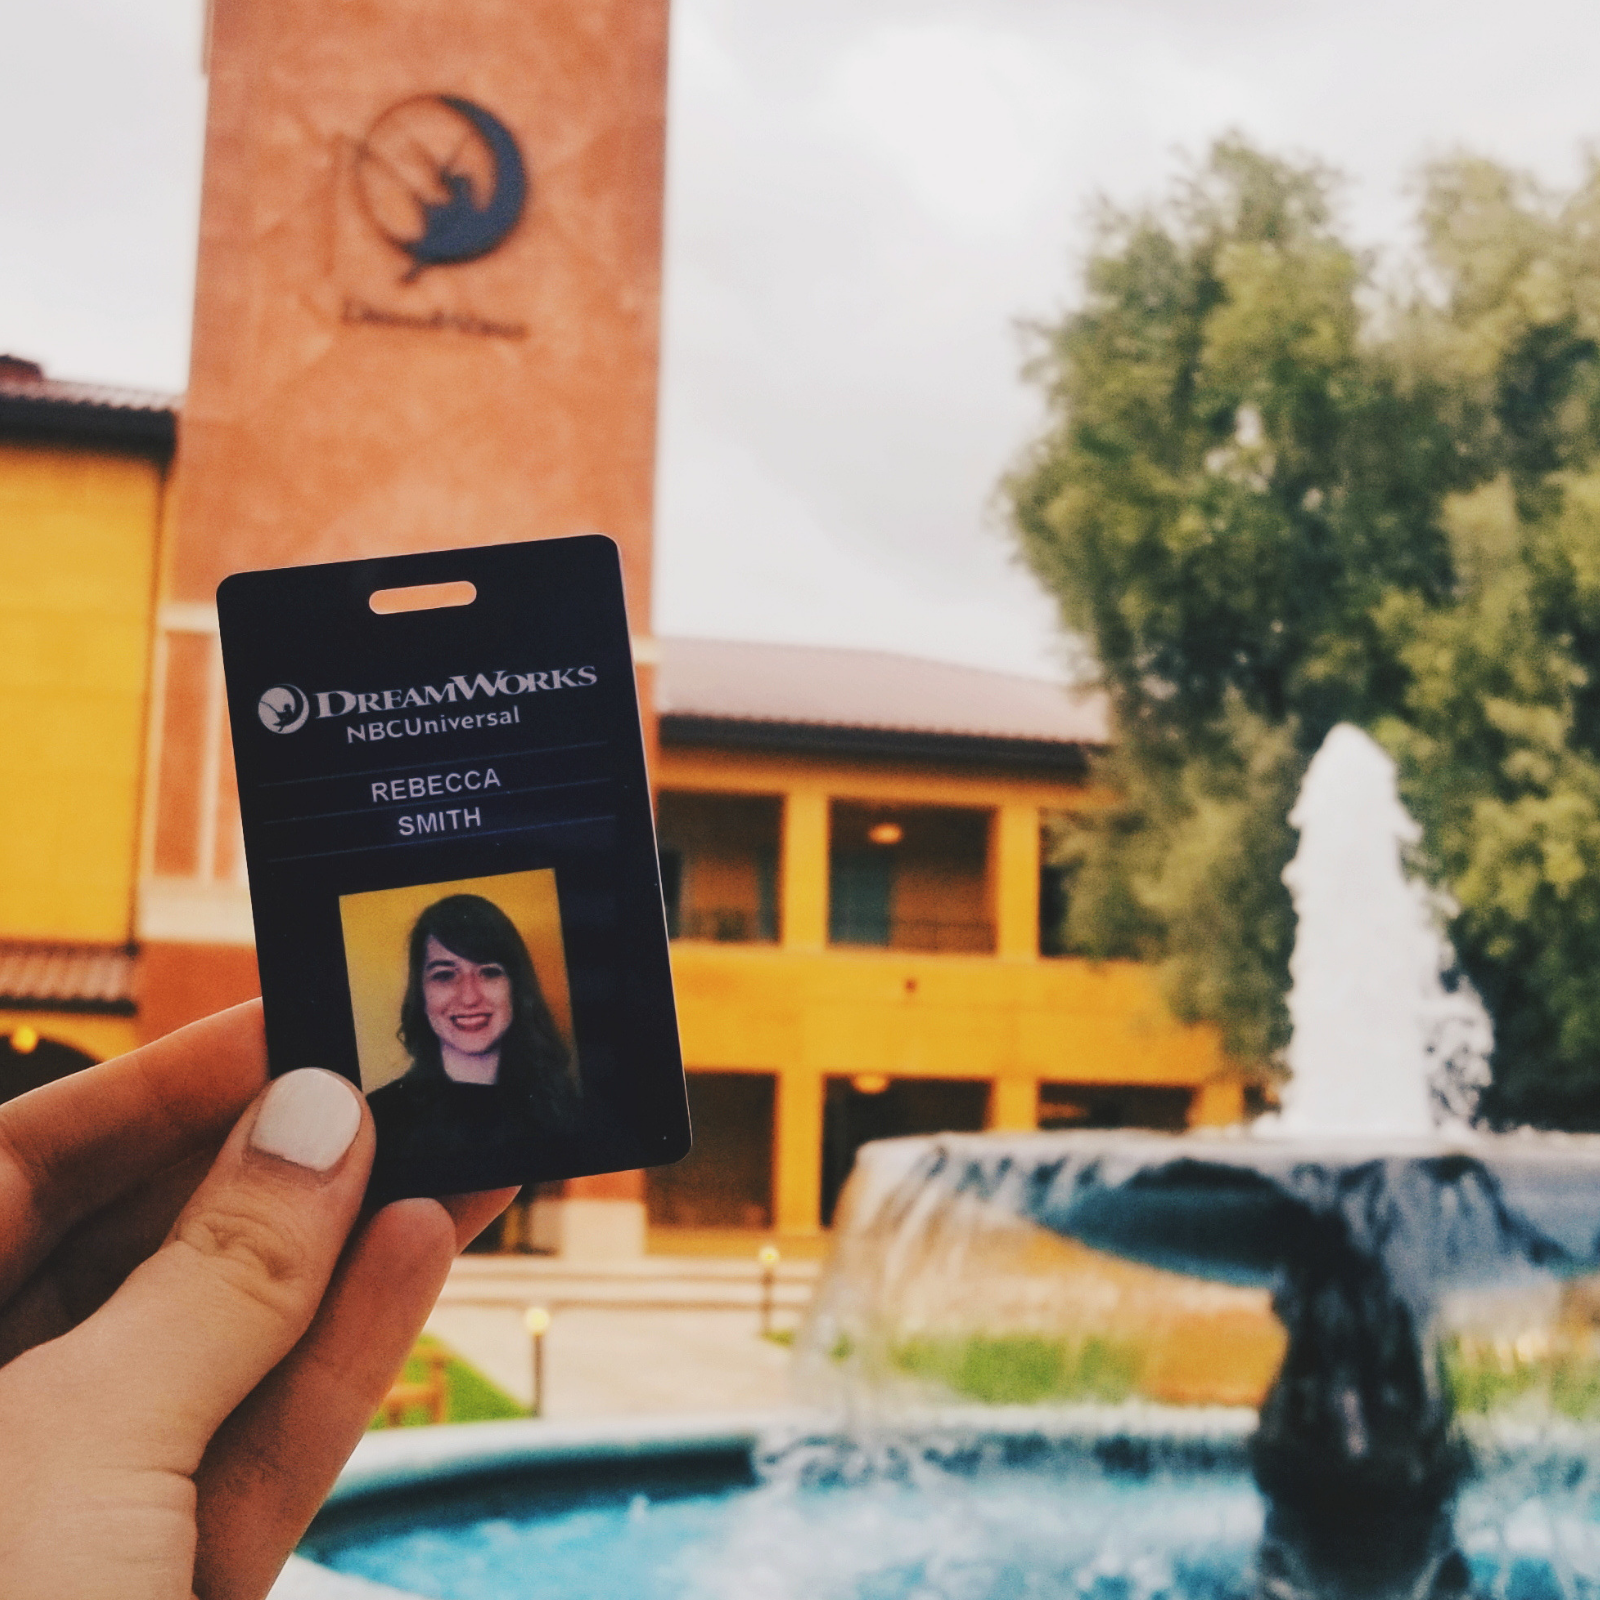 A DreamWorks employee badge in front a fountain and a building that has the DreamWorks logo on it